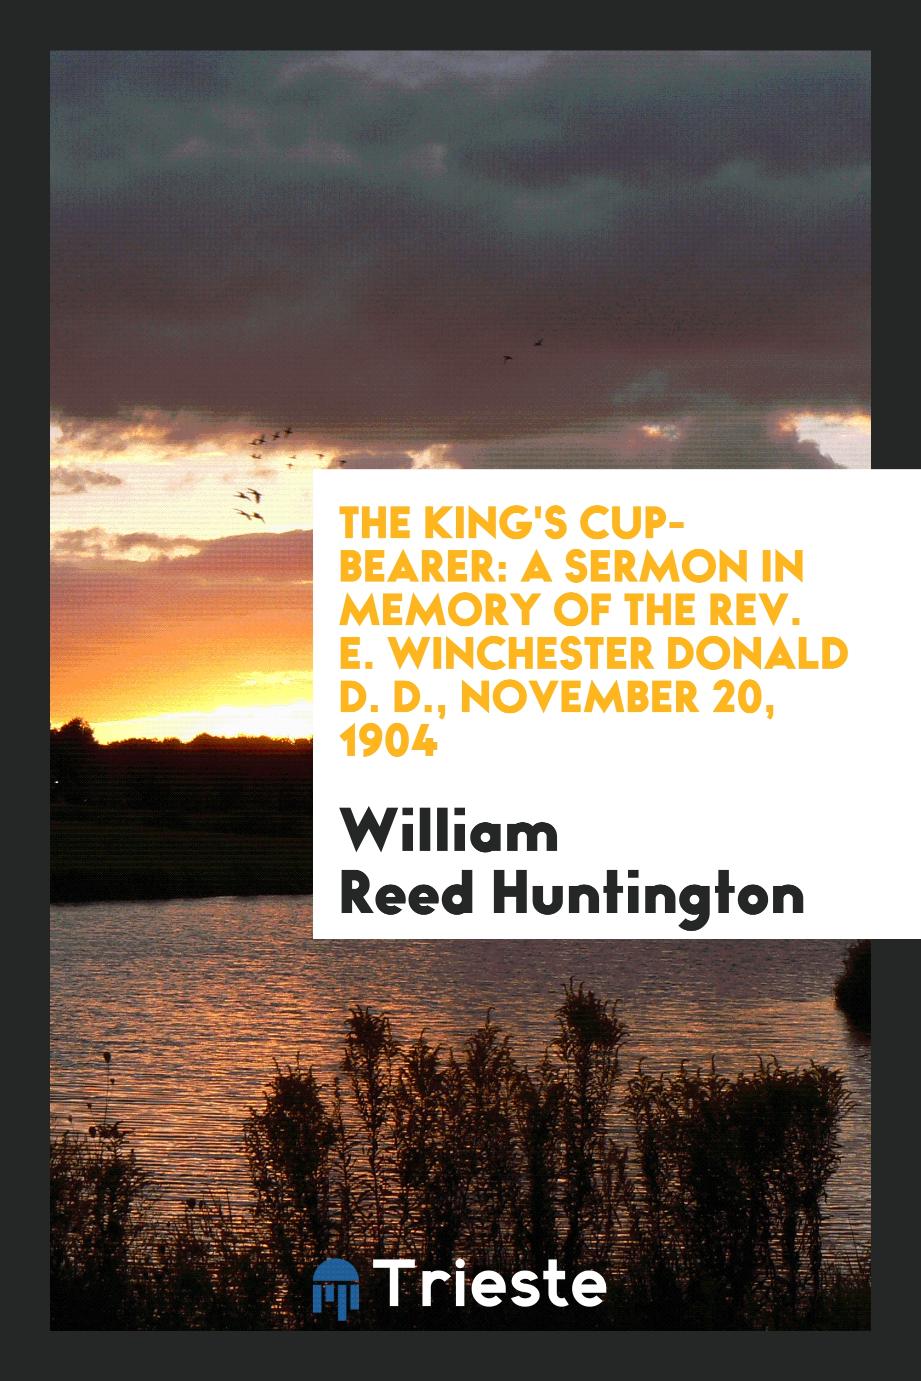 The king's cup-bearer: A sermon in memory of the Rev. E. Winchester Donald D. D., November 20, 1904